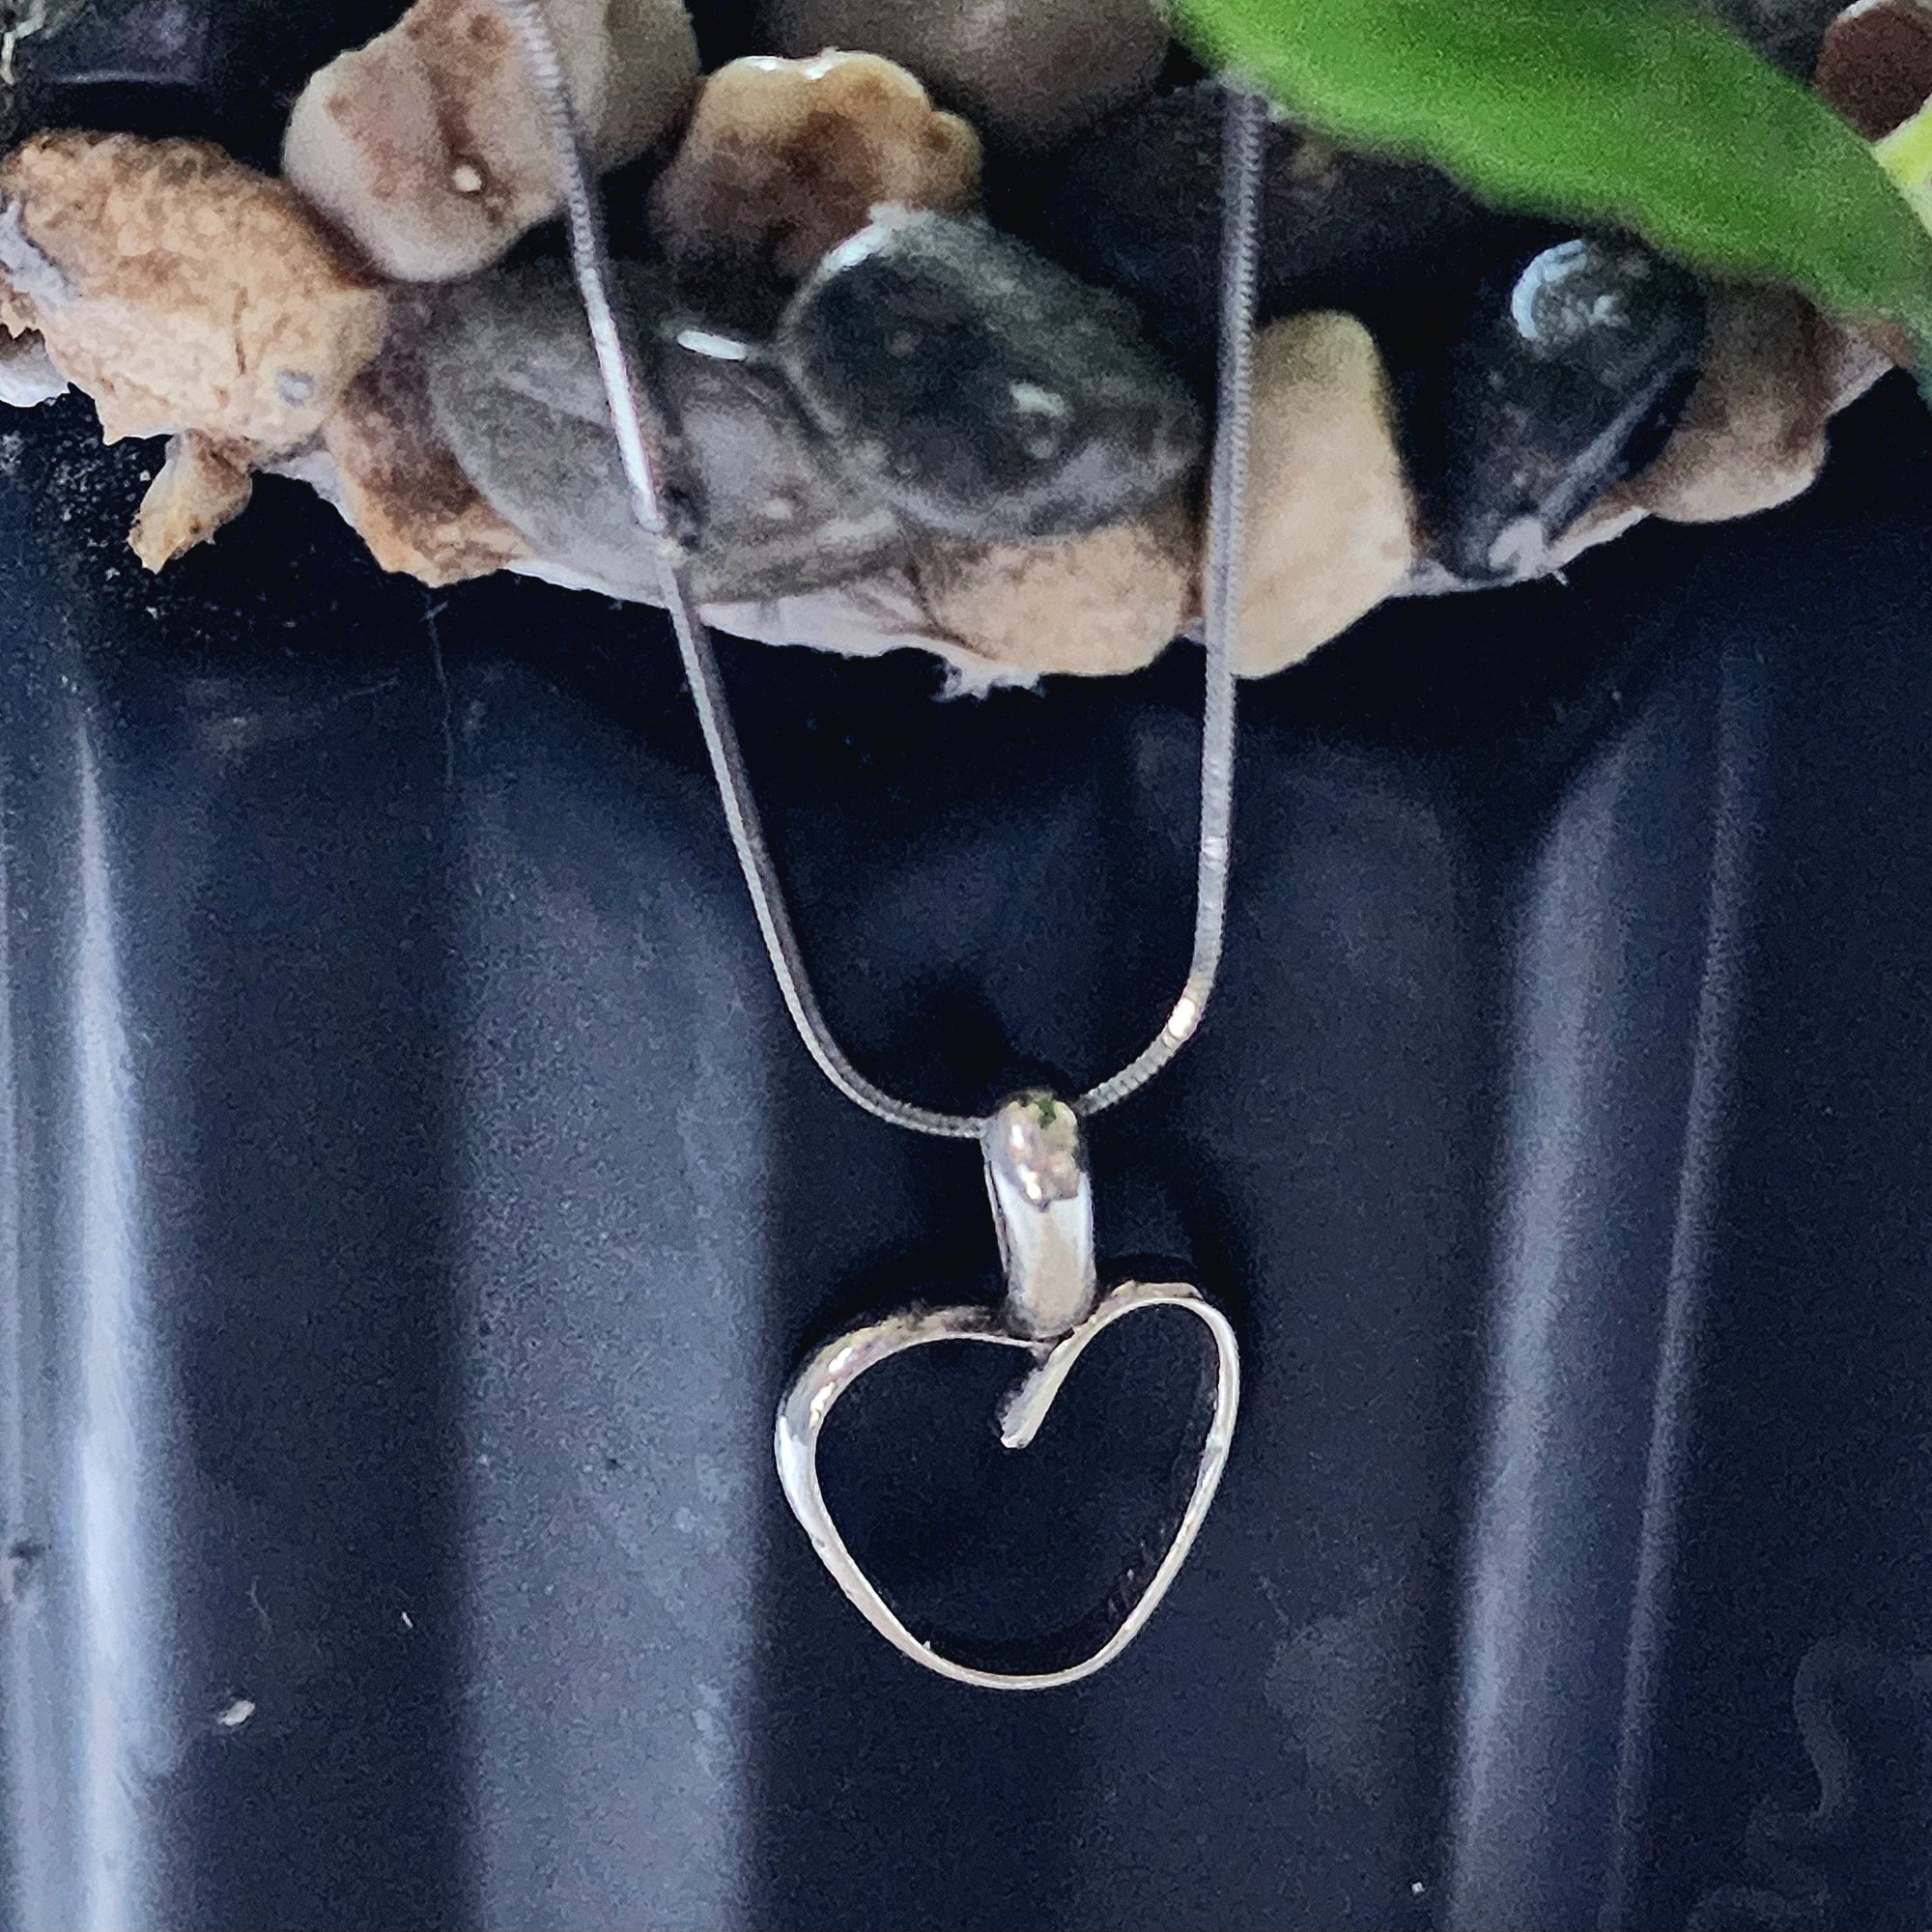 My Heart Sterling Silver Heart Necklace